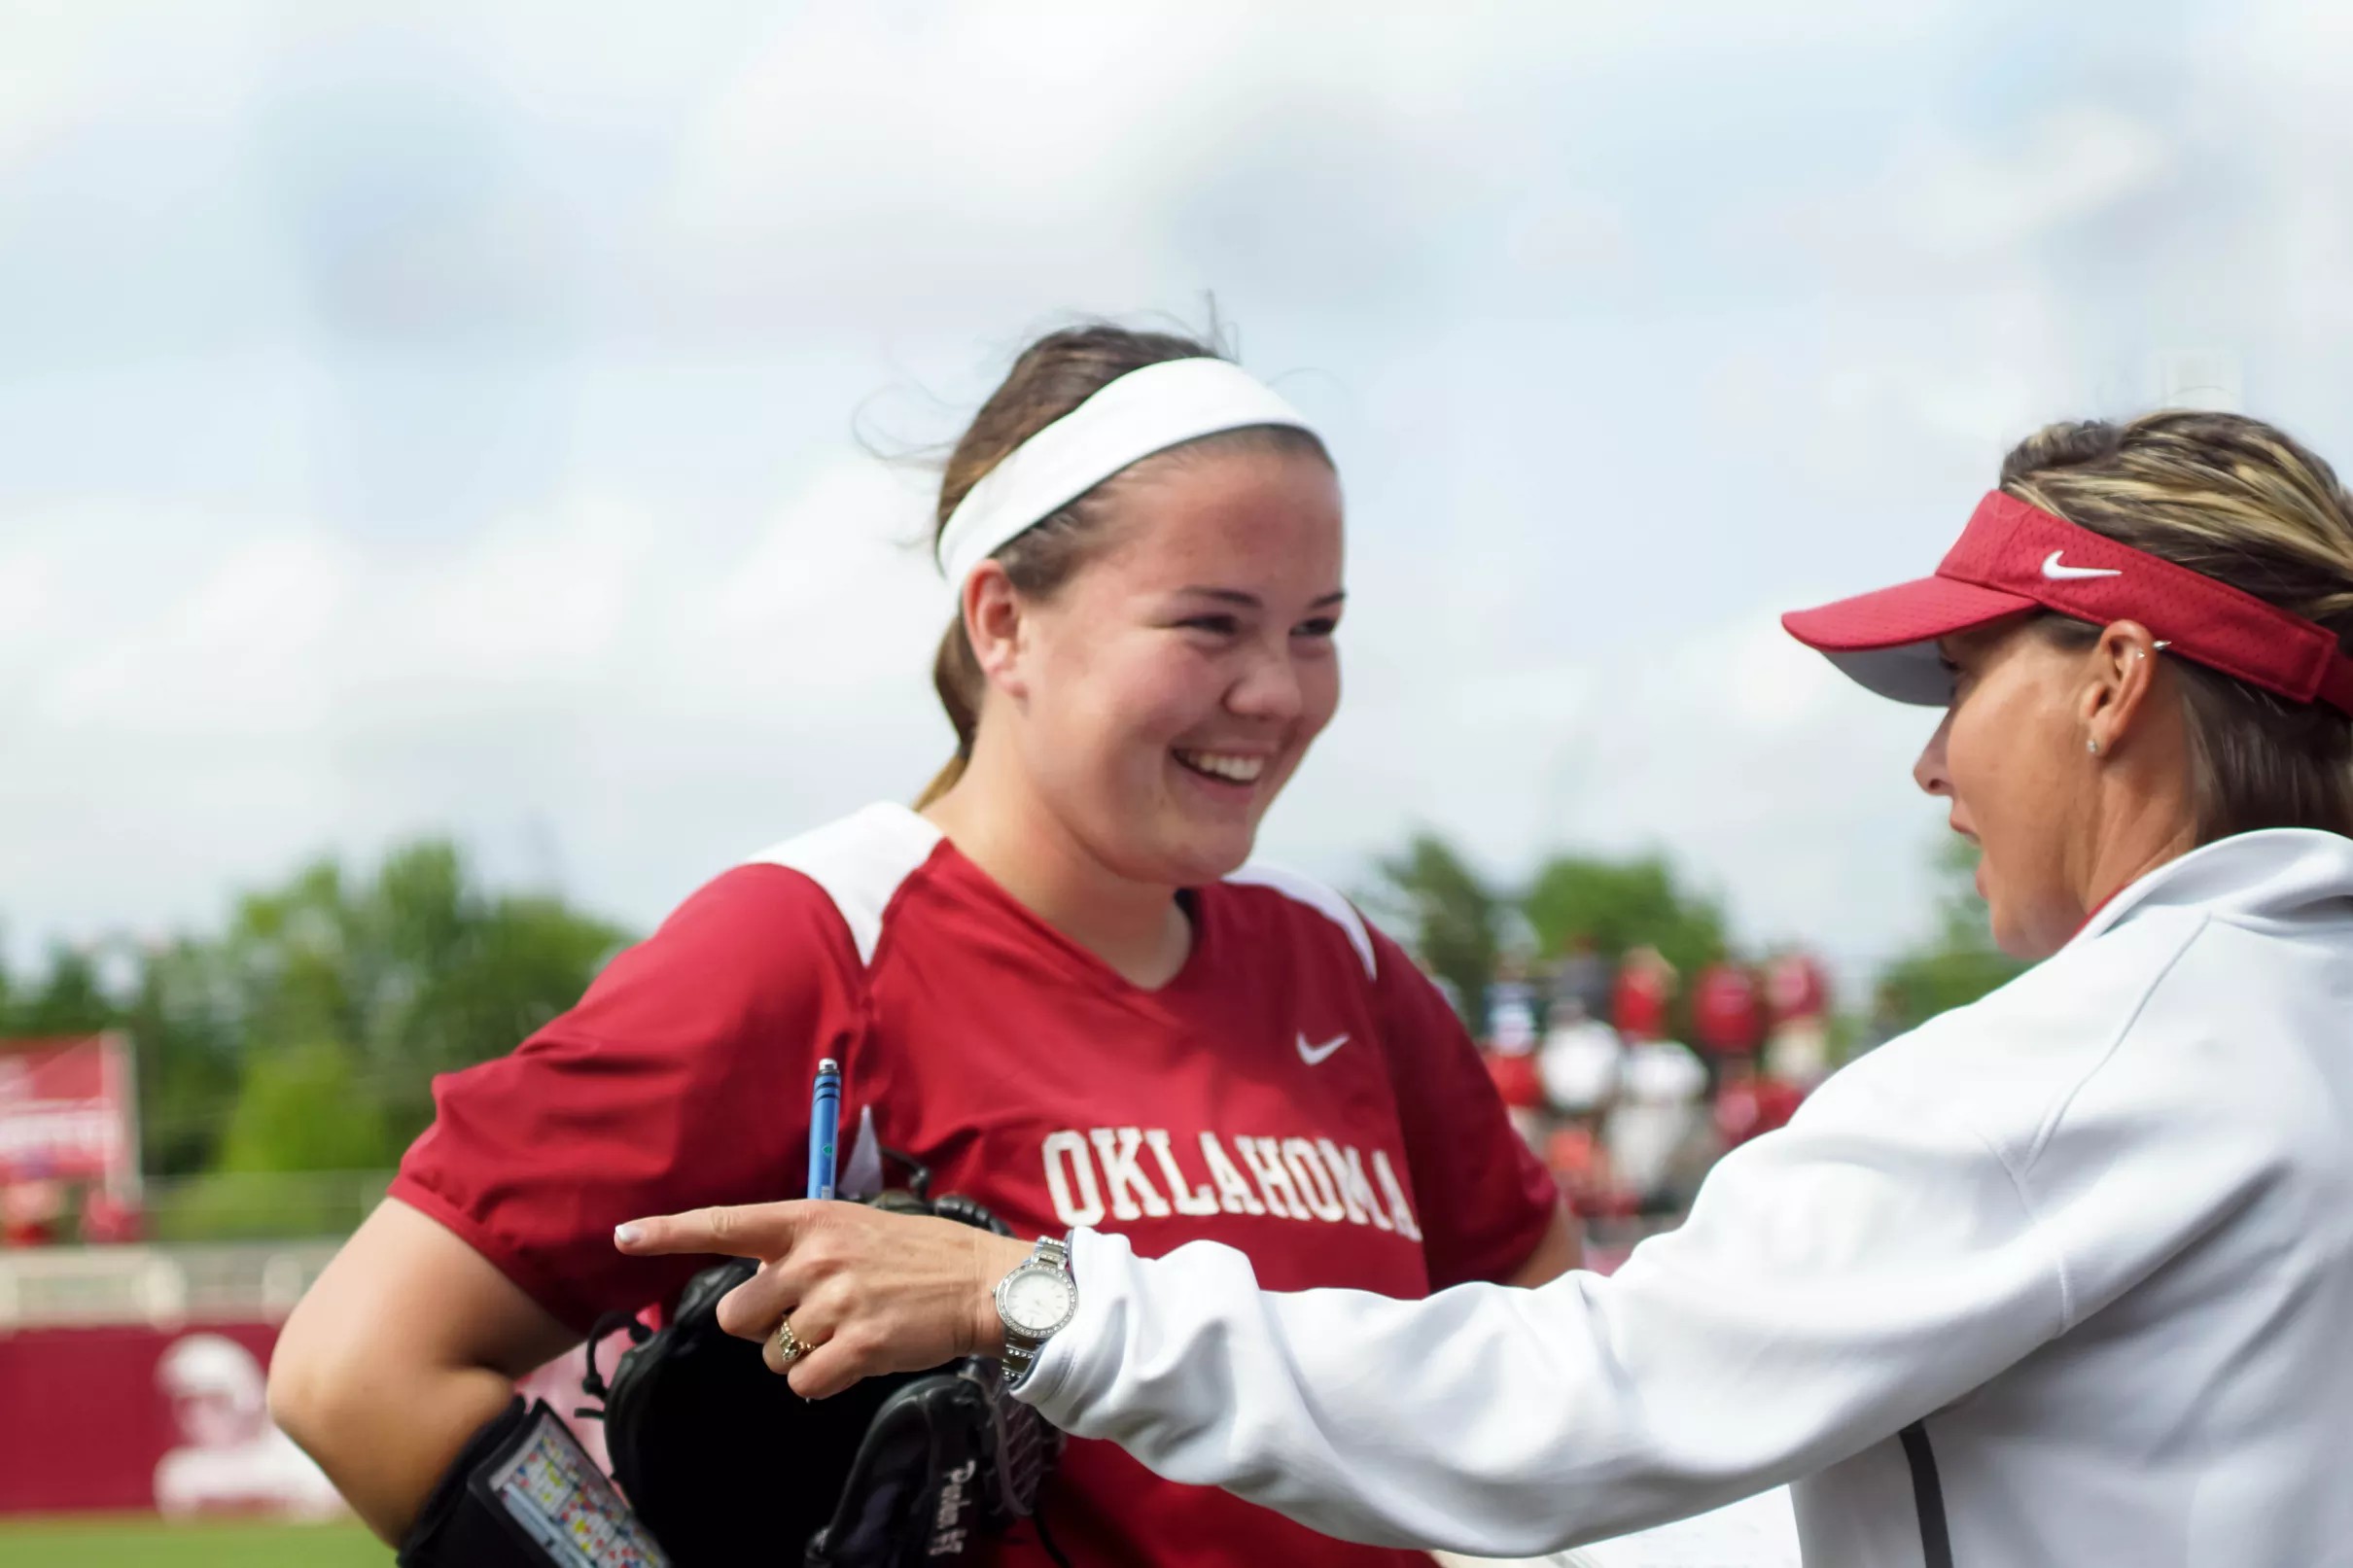 How to Watch Oklahoma Softball at the Women’s College World Series